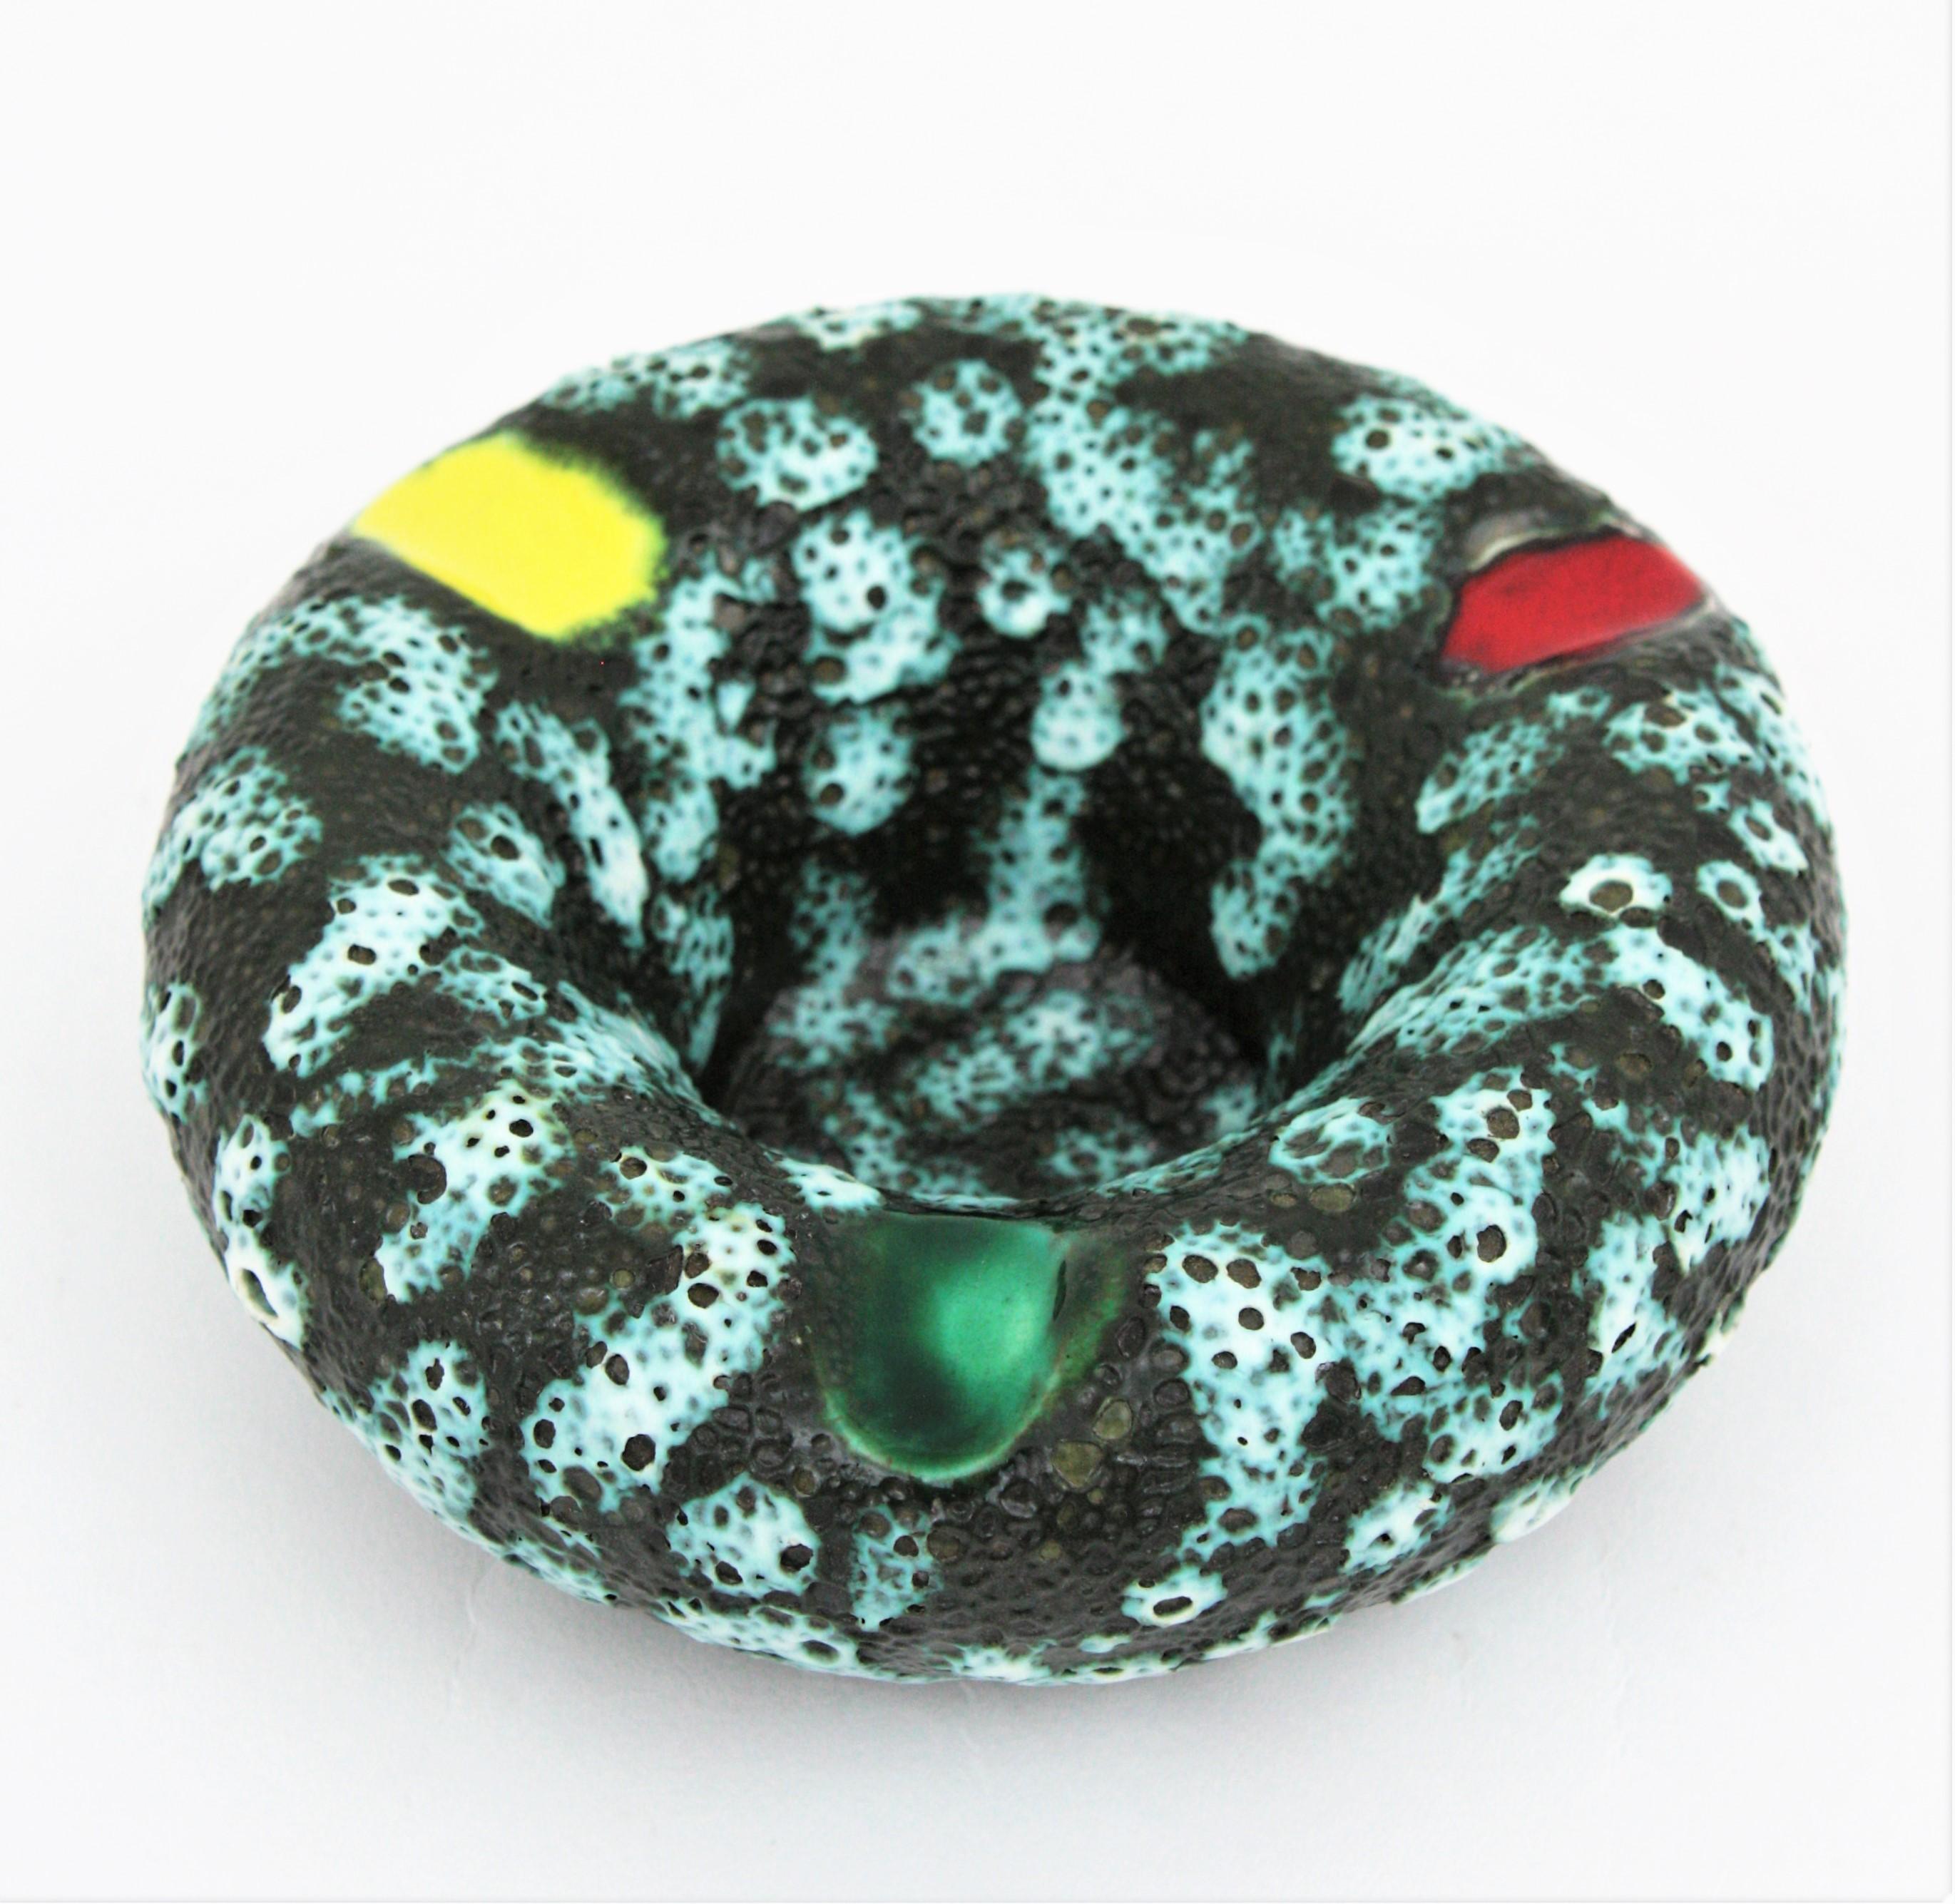 Beautiful fat lava and glazed ceramic ashtray with three colorful bands manufactured by Vallauris. France, 1950s.
This cool ashtray was handcrafted in France at the mid-20th century period. Its design in turquoise and grey fat lava ceramic with